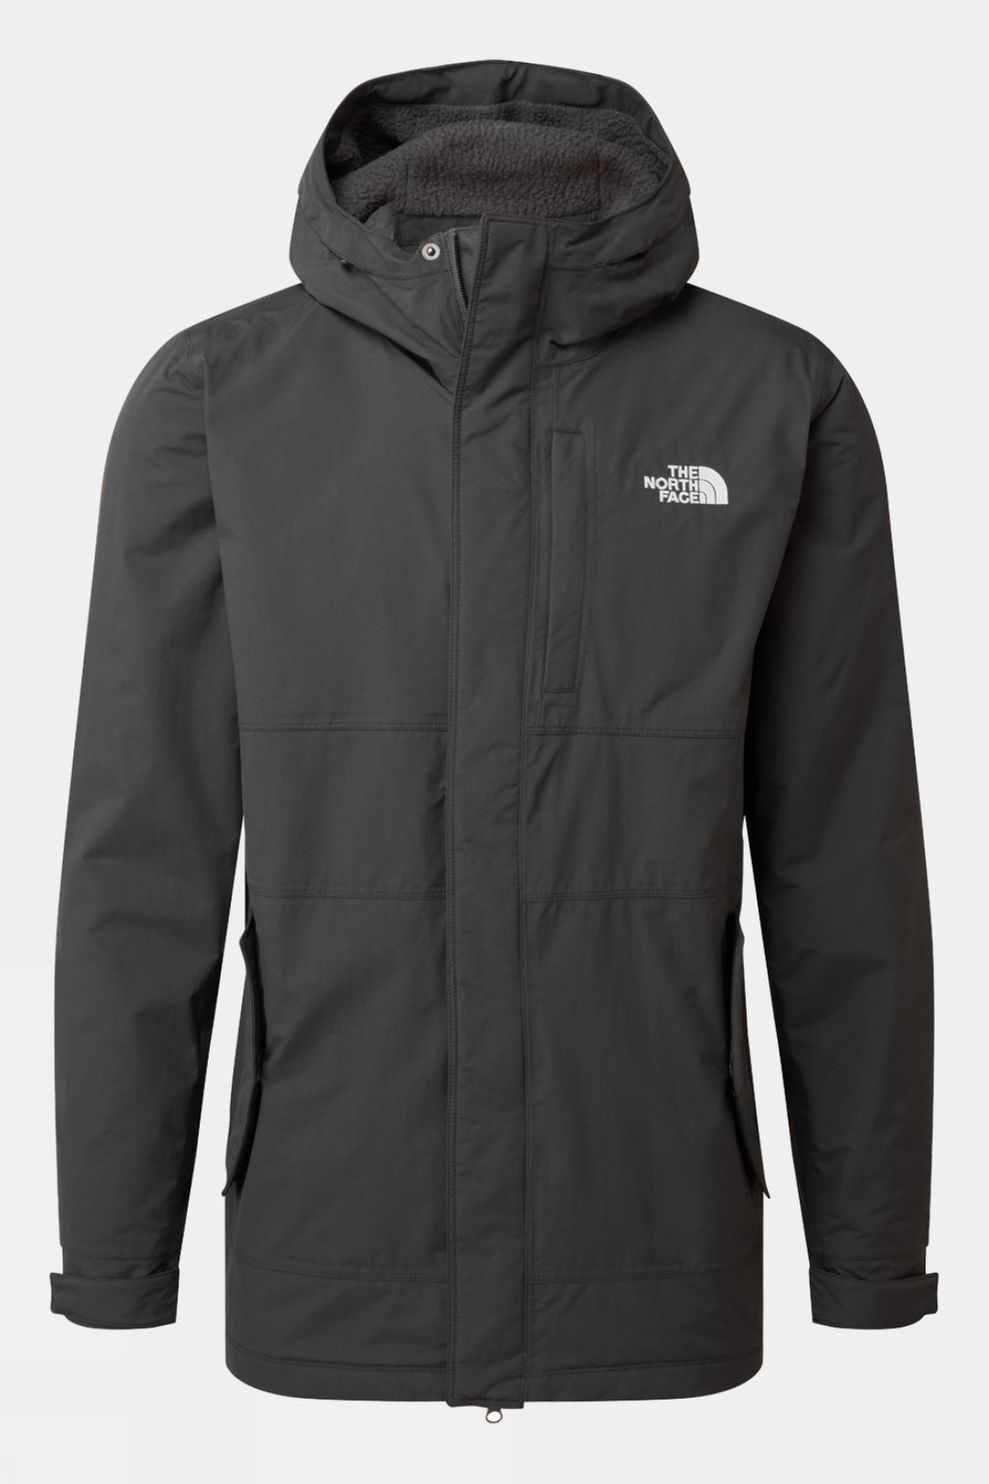 North face jackets for men插图3